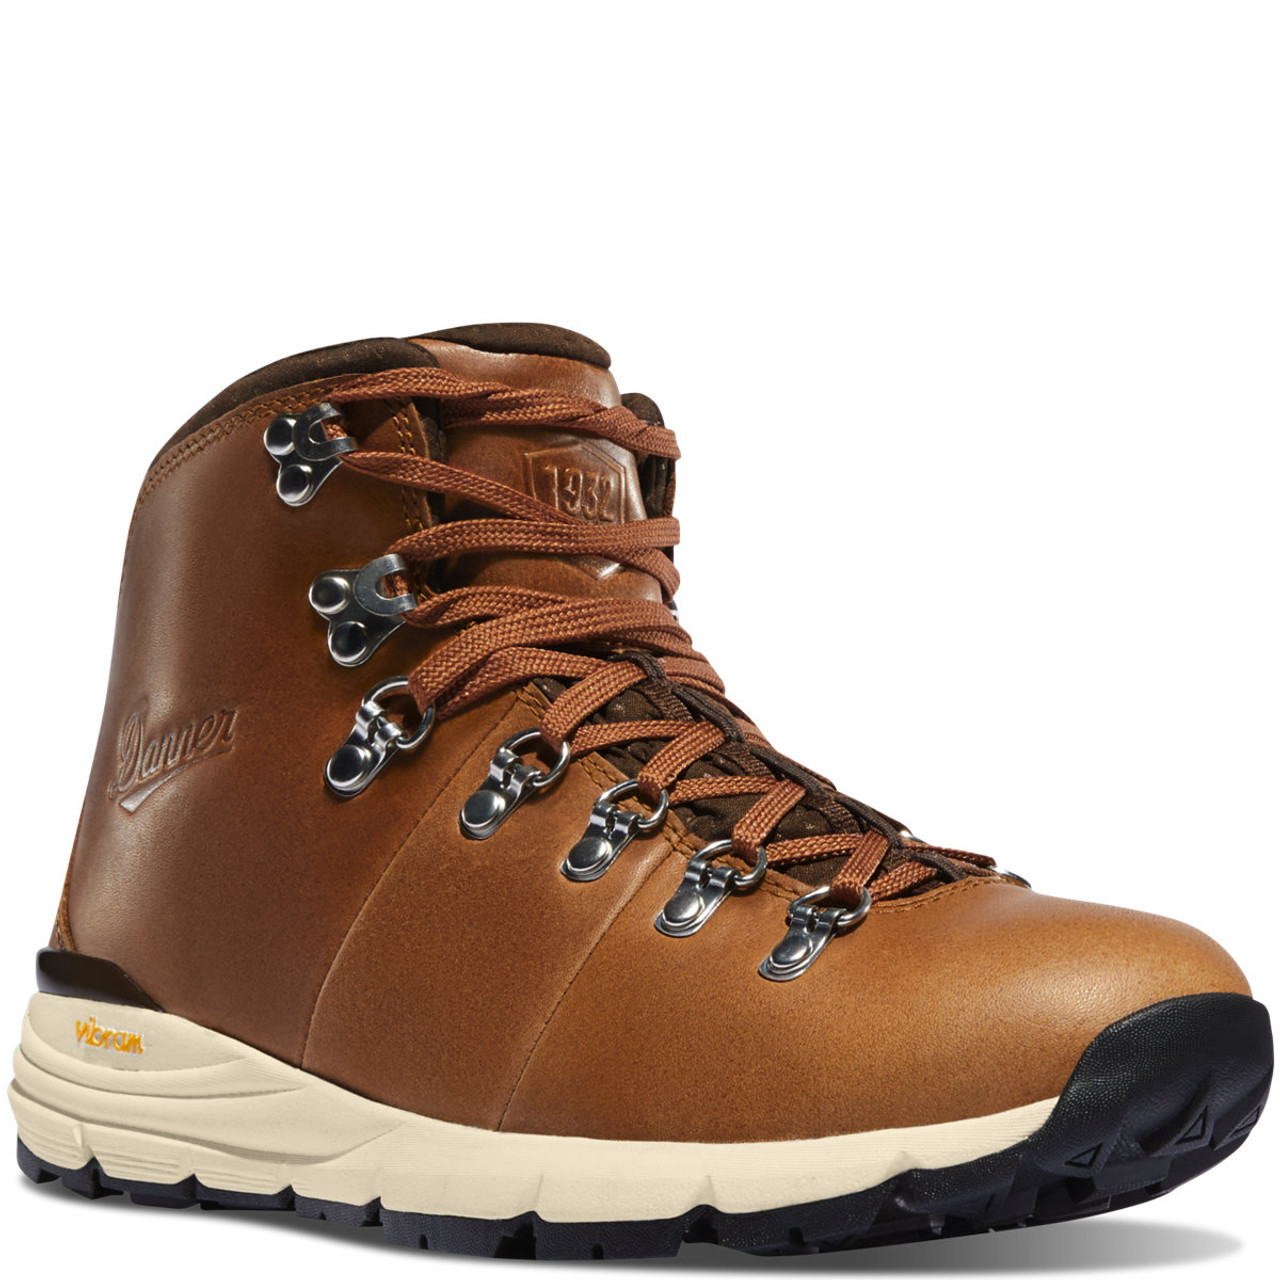 DANNER® MOUNTAIN 600 WOMEN'S SIZING 4.5" SADDLE TAN LIFESTYLE BOOTS 62259